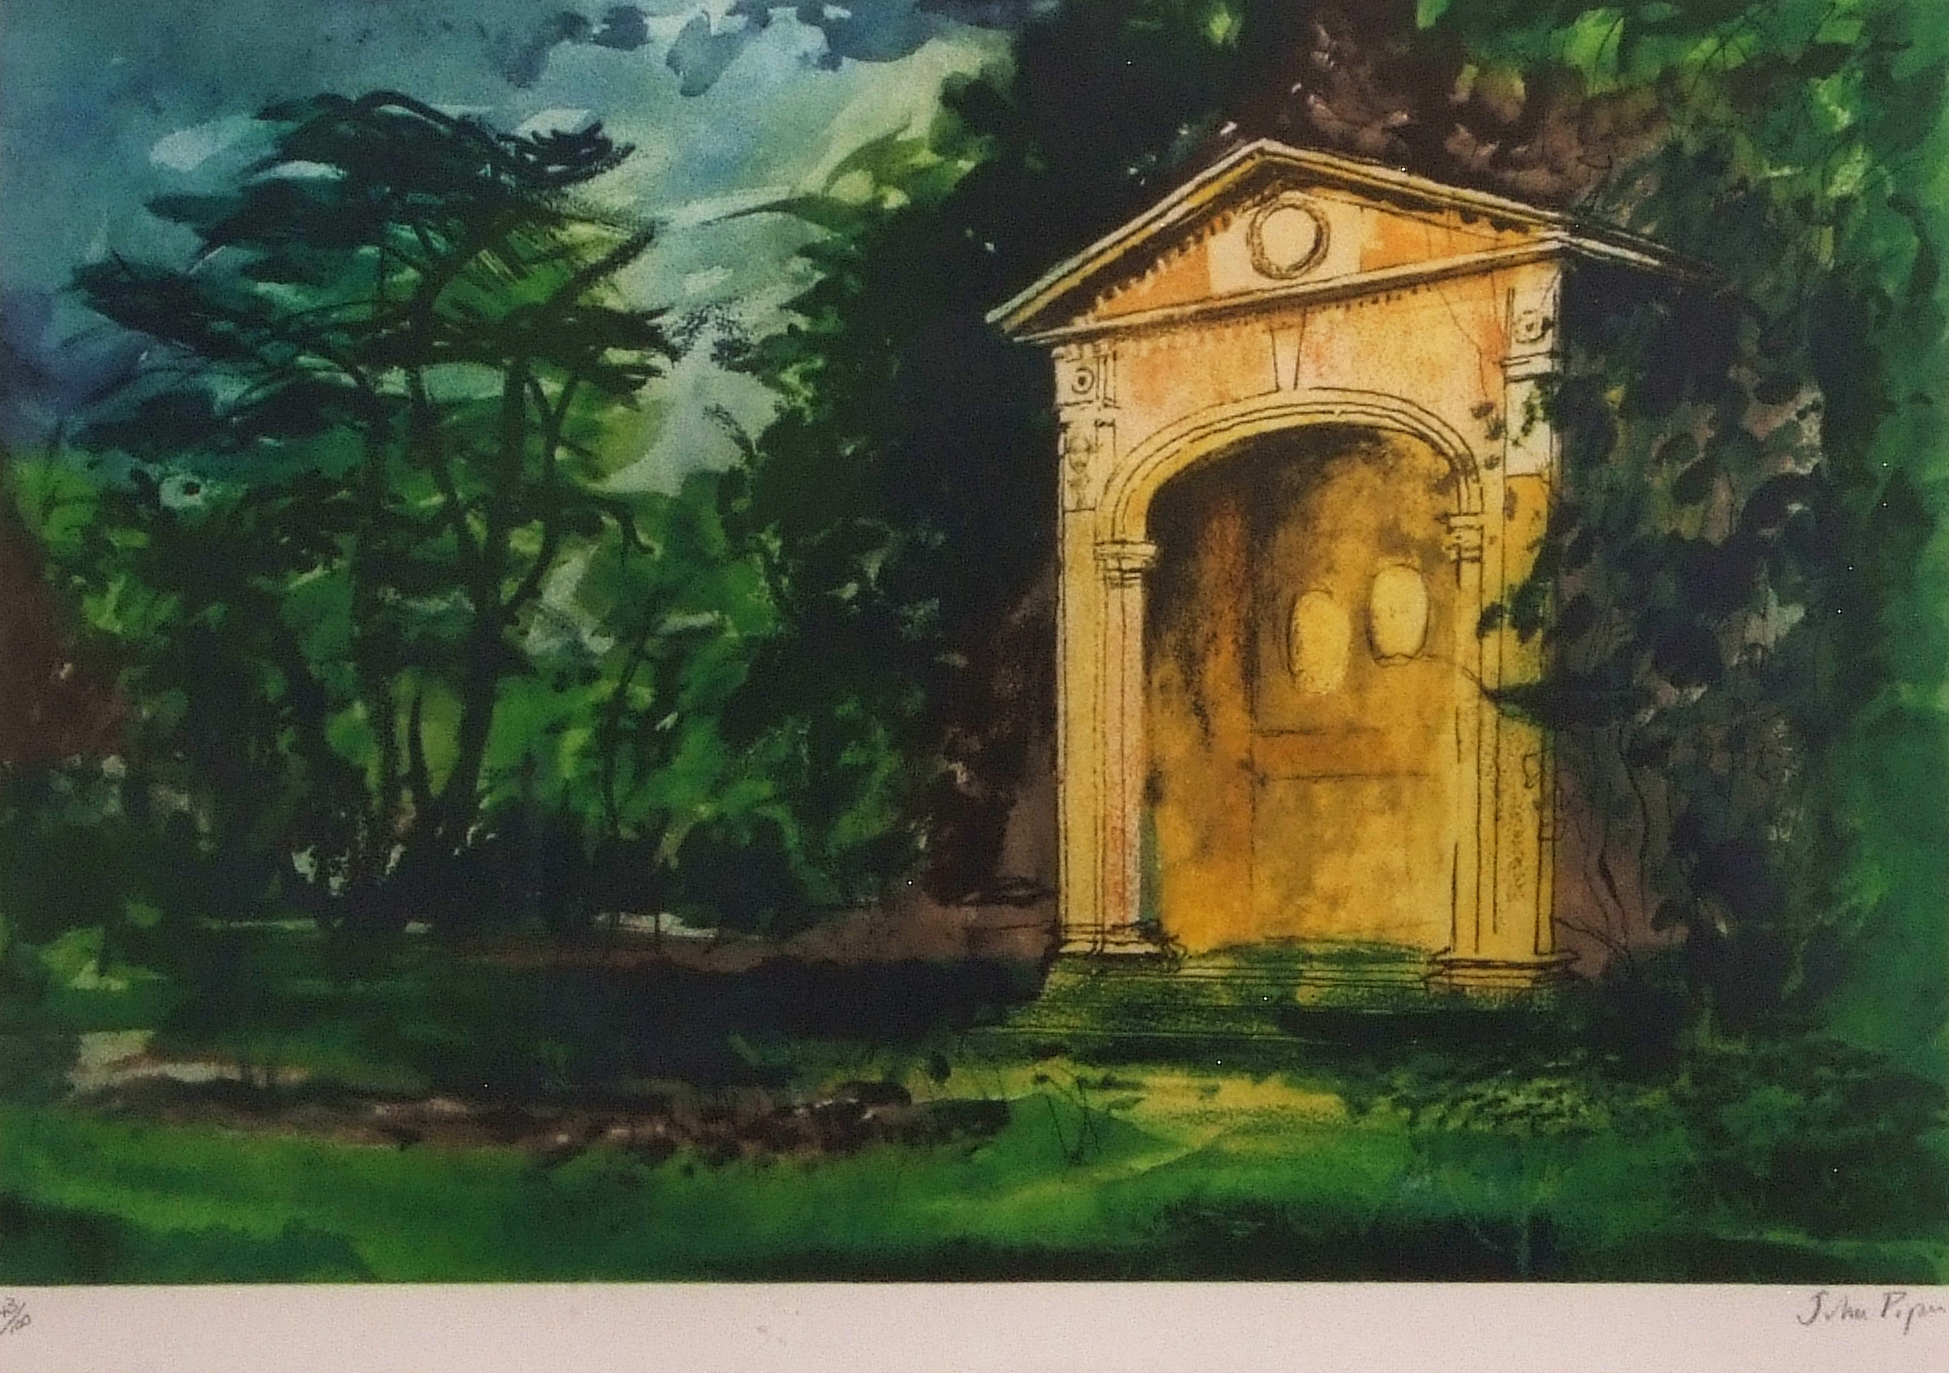 •AR John Piper, CH (1903-1992), "Temple at Stowe", lithograph, signed and numbered 43/100 in